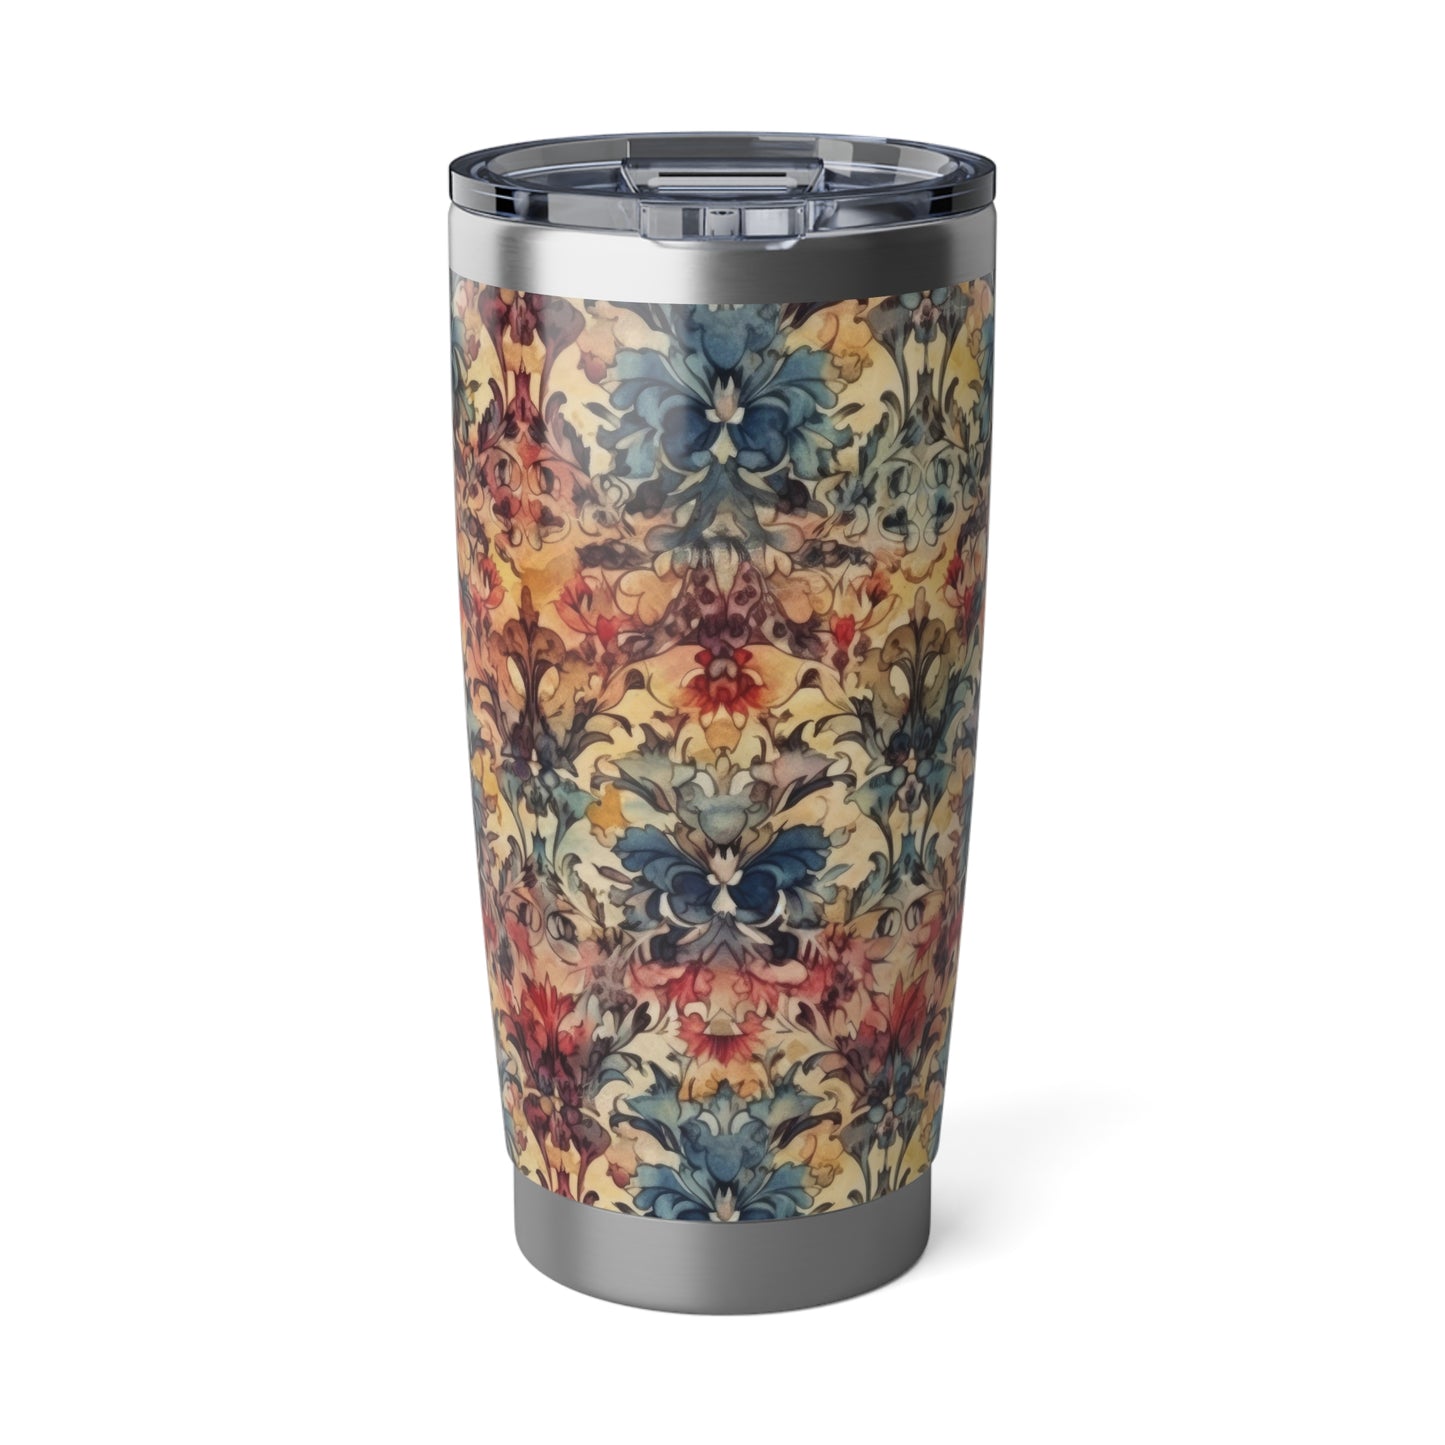 Tapestry Designs 1.2 - Vagabond 20oz Tumbler - Stainless Steel - Double Wall